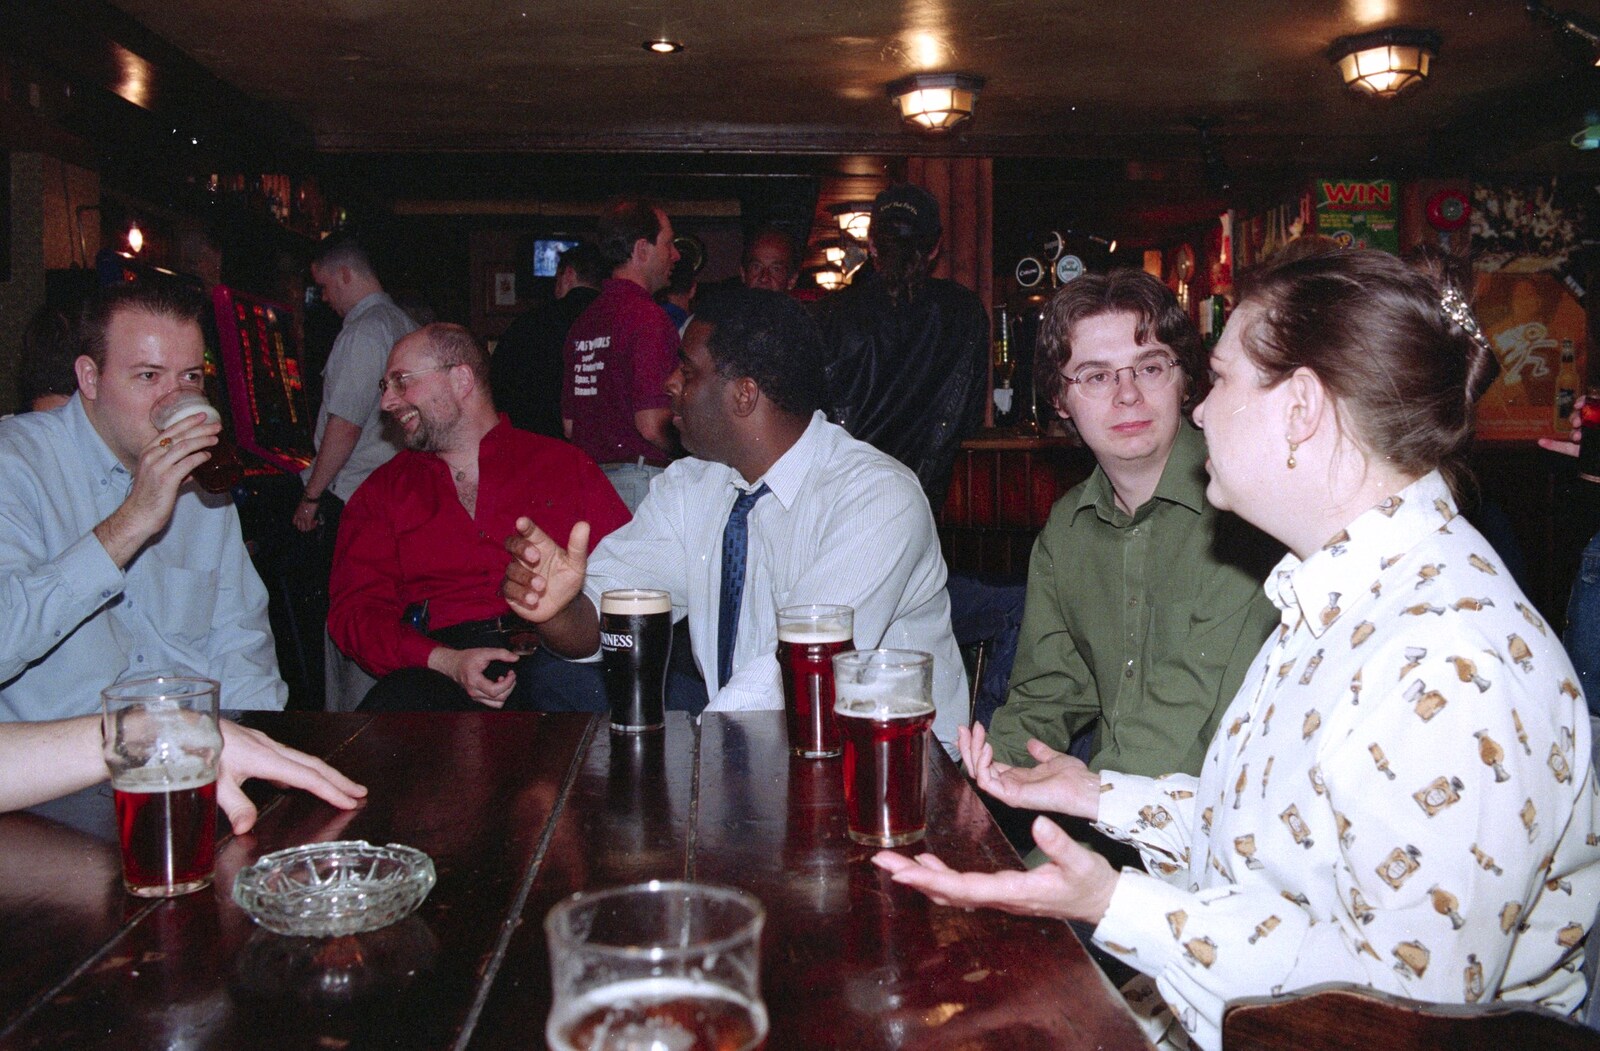 More beer in the Lord Nelson on Fore Street from CISU at the Dhaka Diner, Tacket Street, Ipswich - 25th May 2000